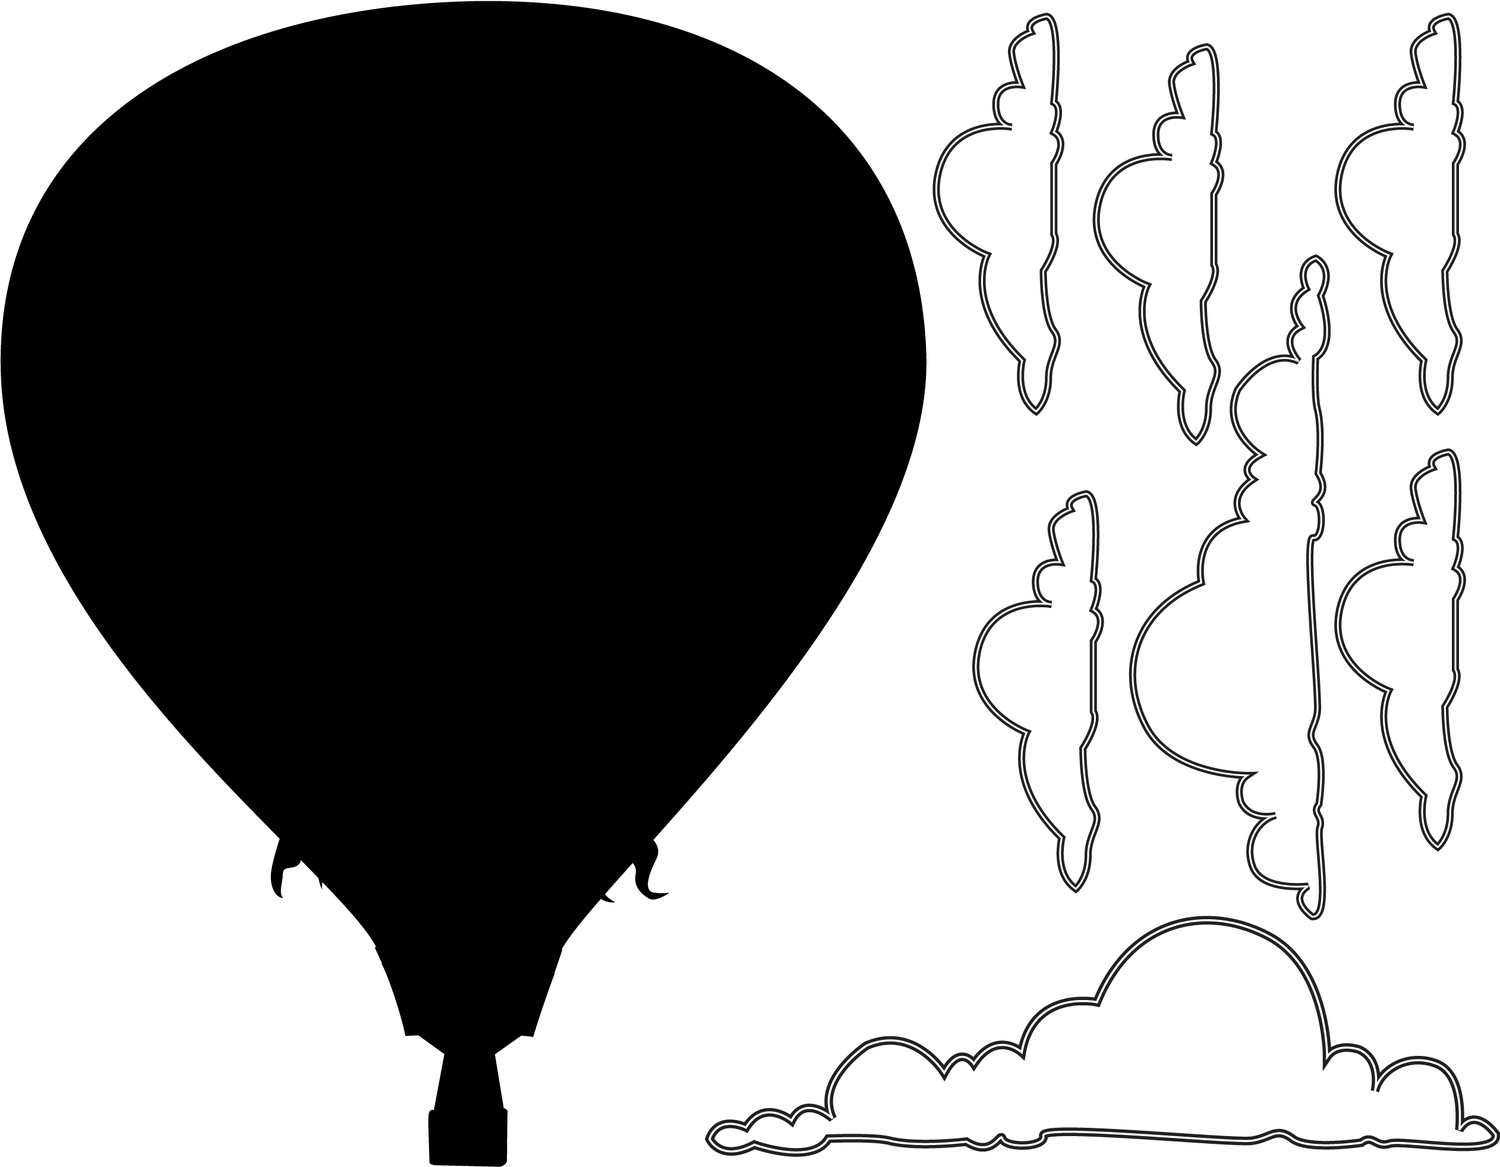 Hot Air Balloon Chalkboard Decal Set by WilsonGraphics on Etsy